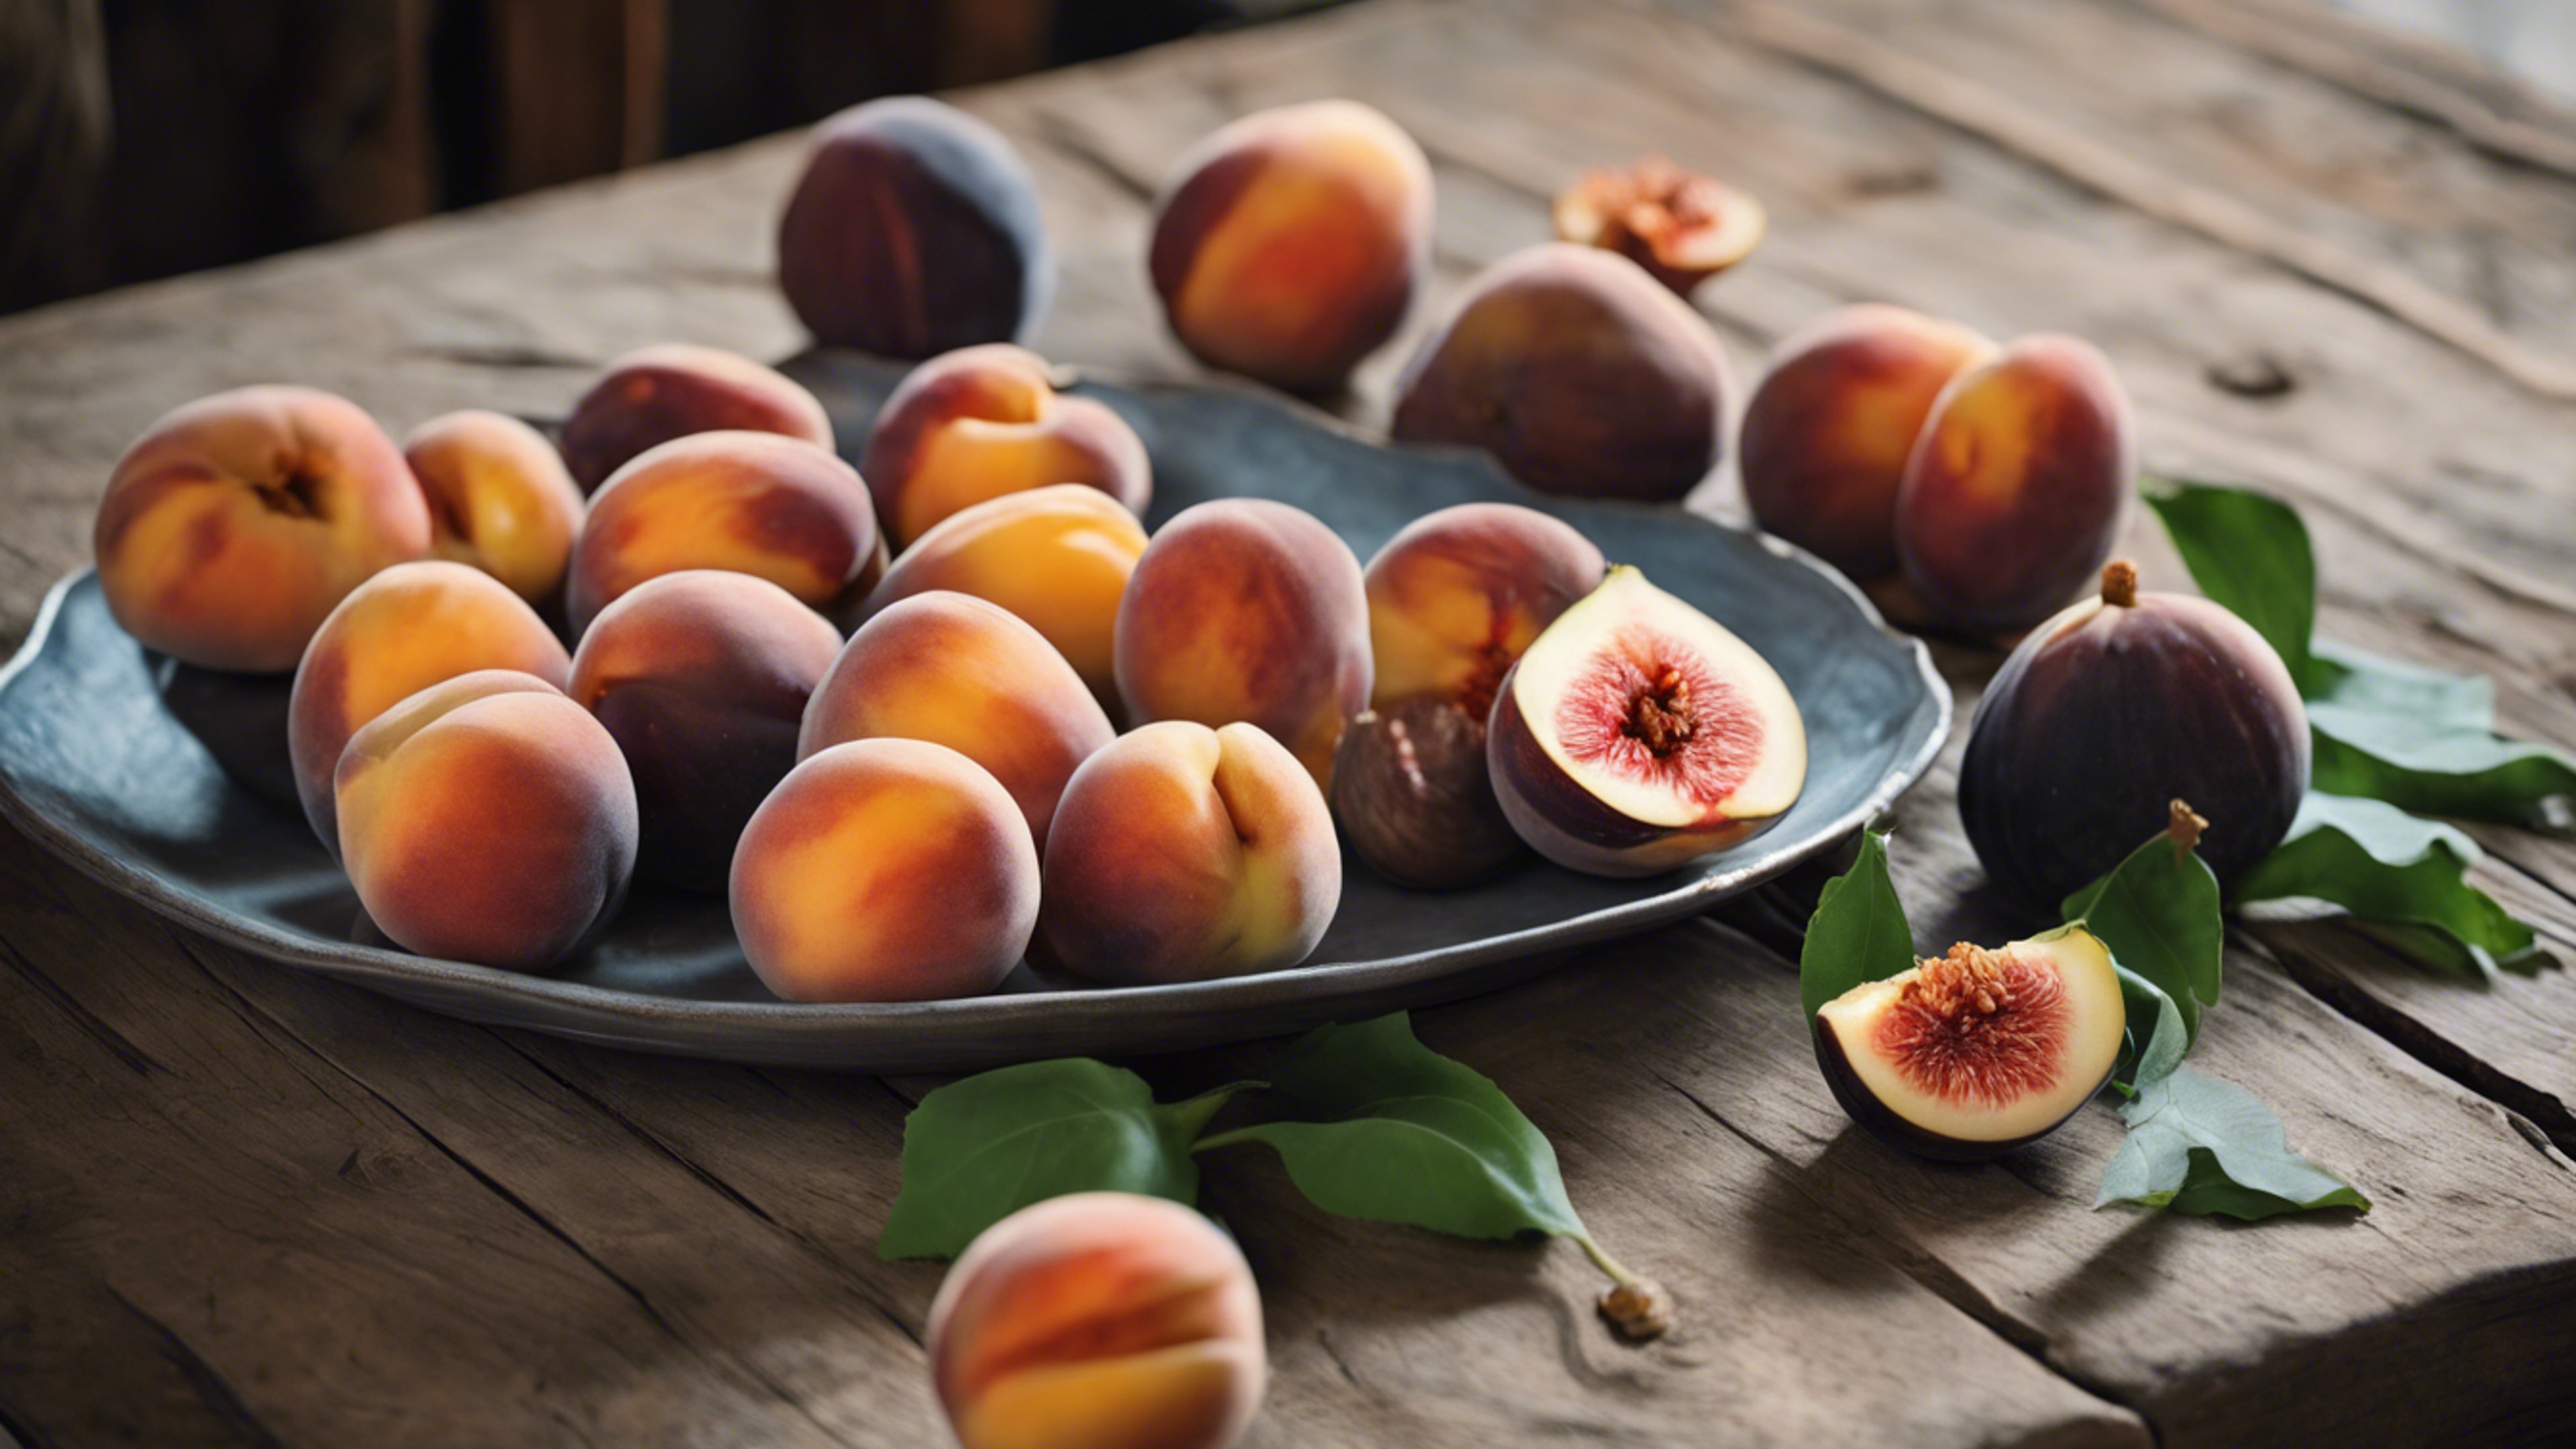 Still life of peaches and figs arranged beautifully on a rustic wooden table. ផ្ទាំង​រូបភាព[c31d3ce6096543dcac89]